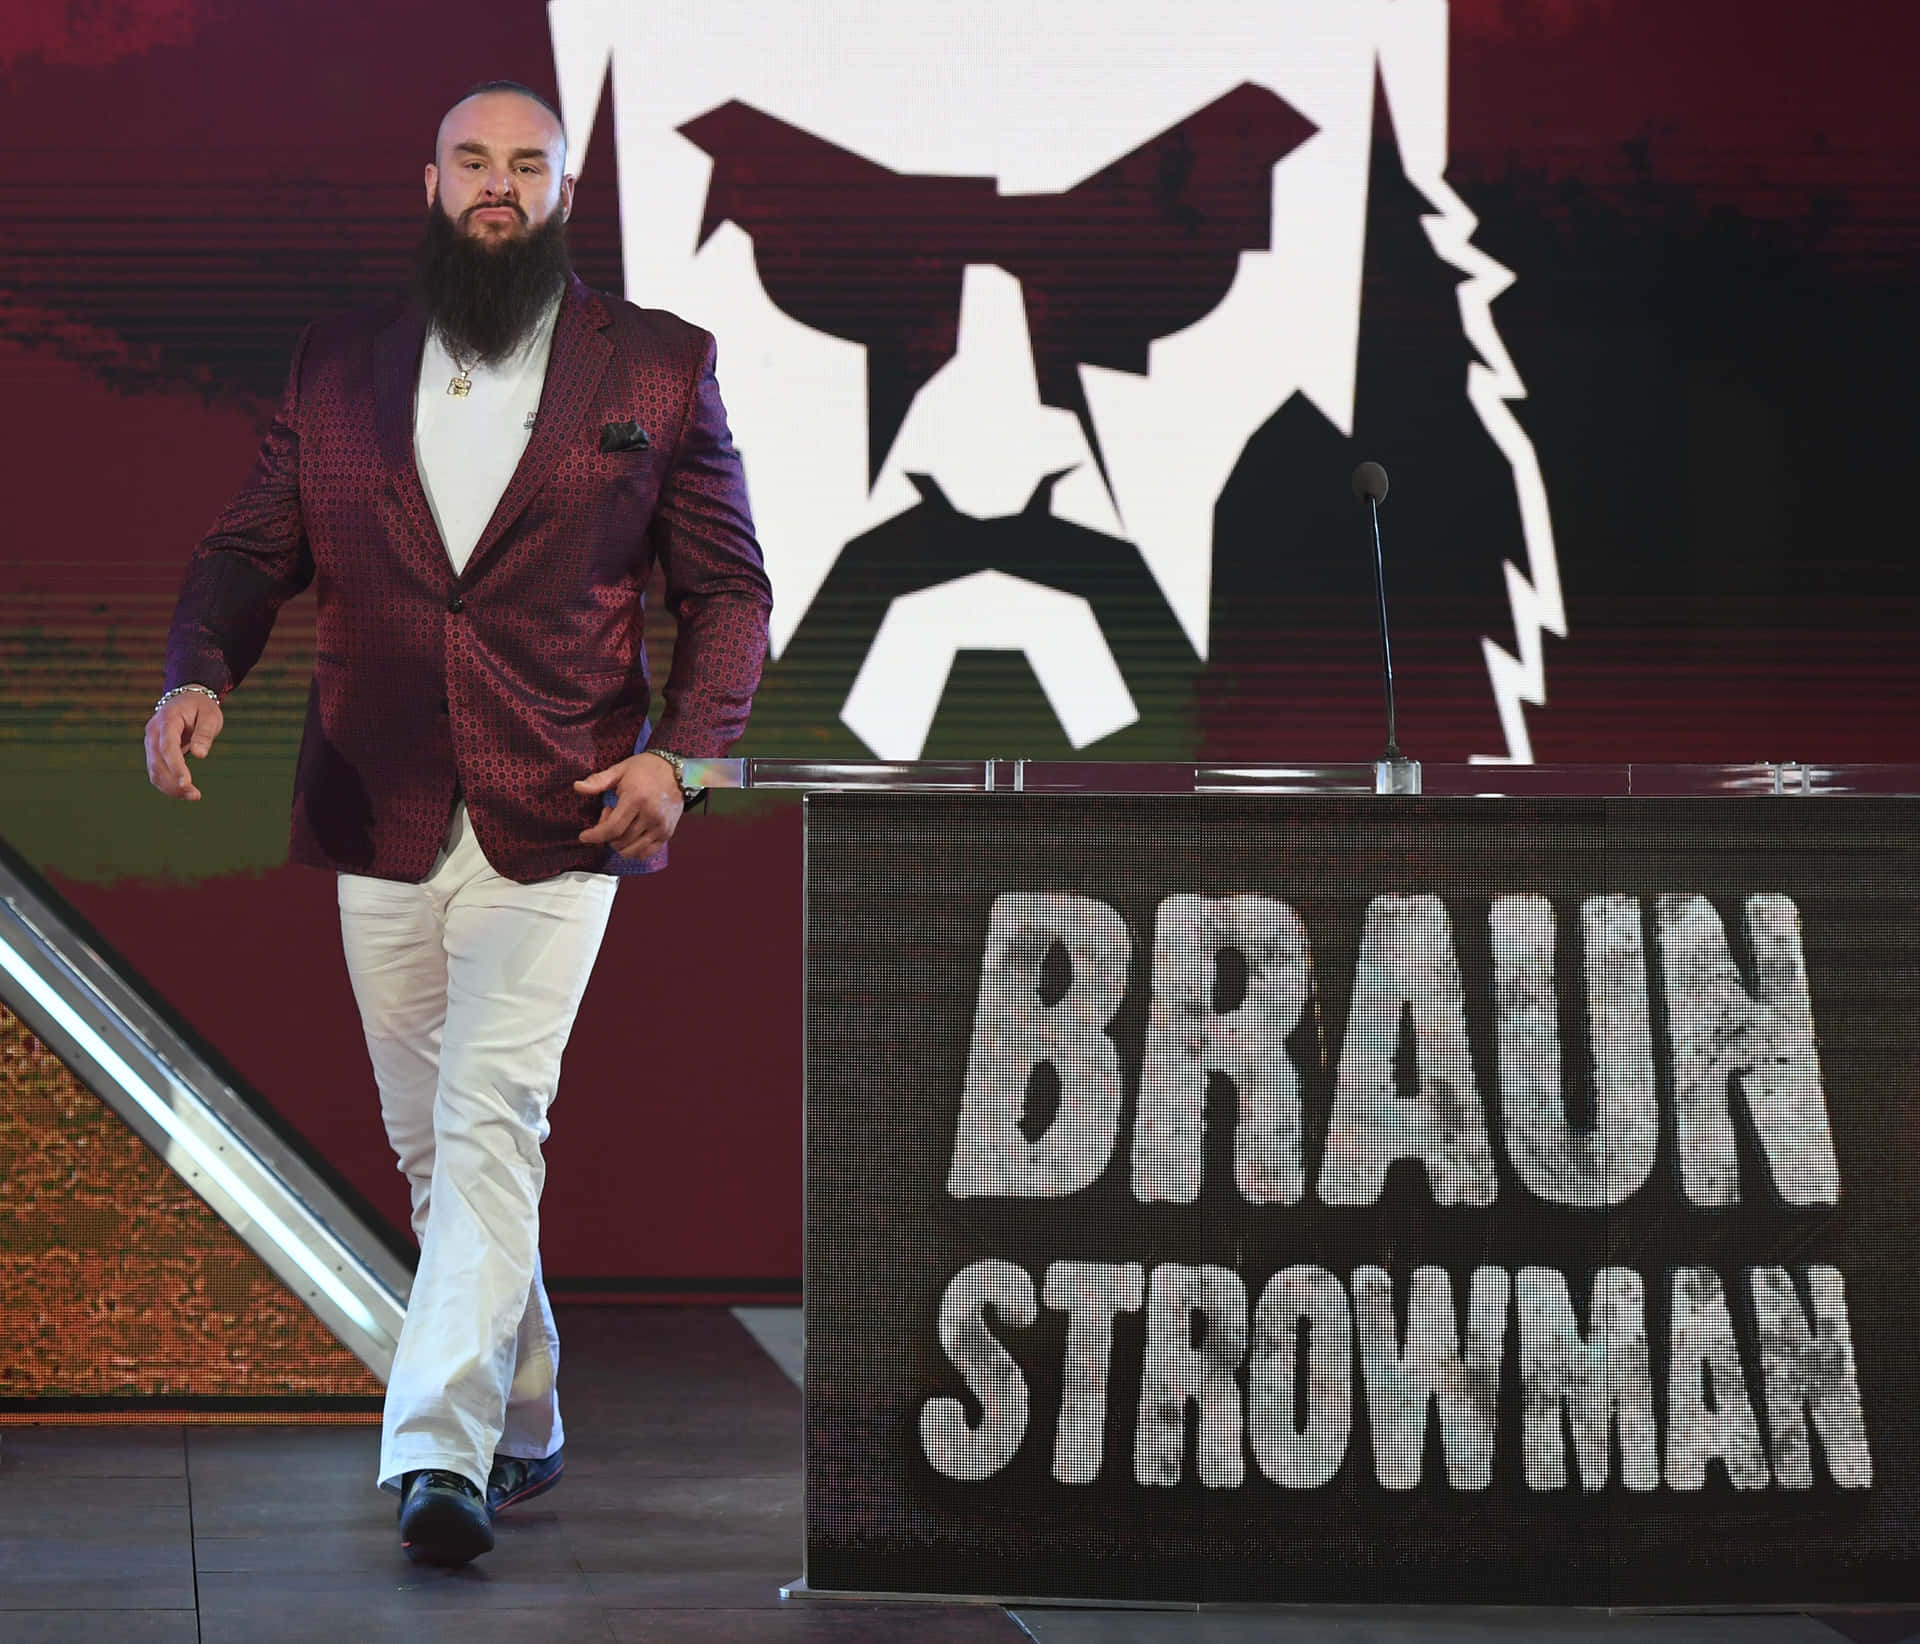 Wwe American Wrestler Braun Strowman At T-mobile Arena Picture